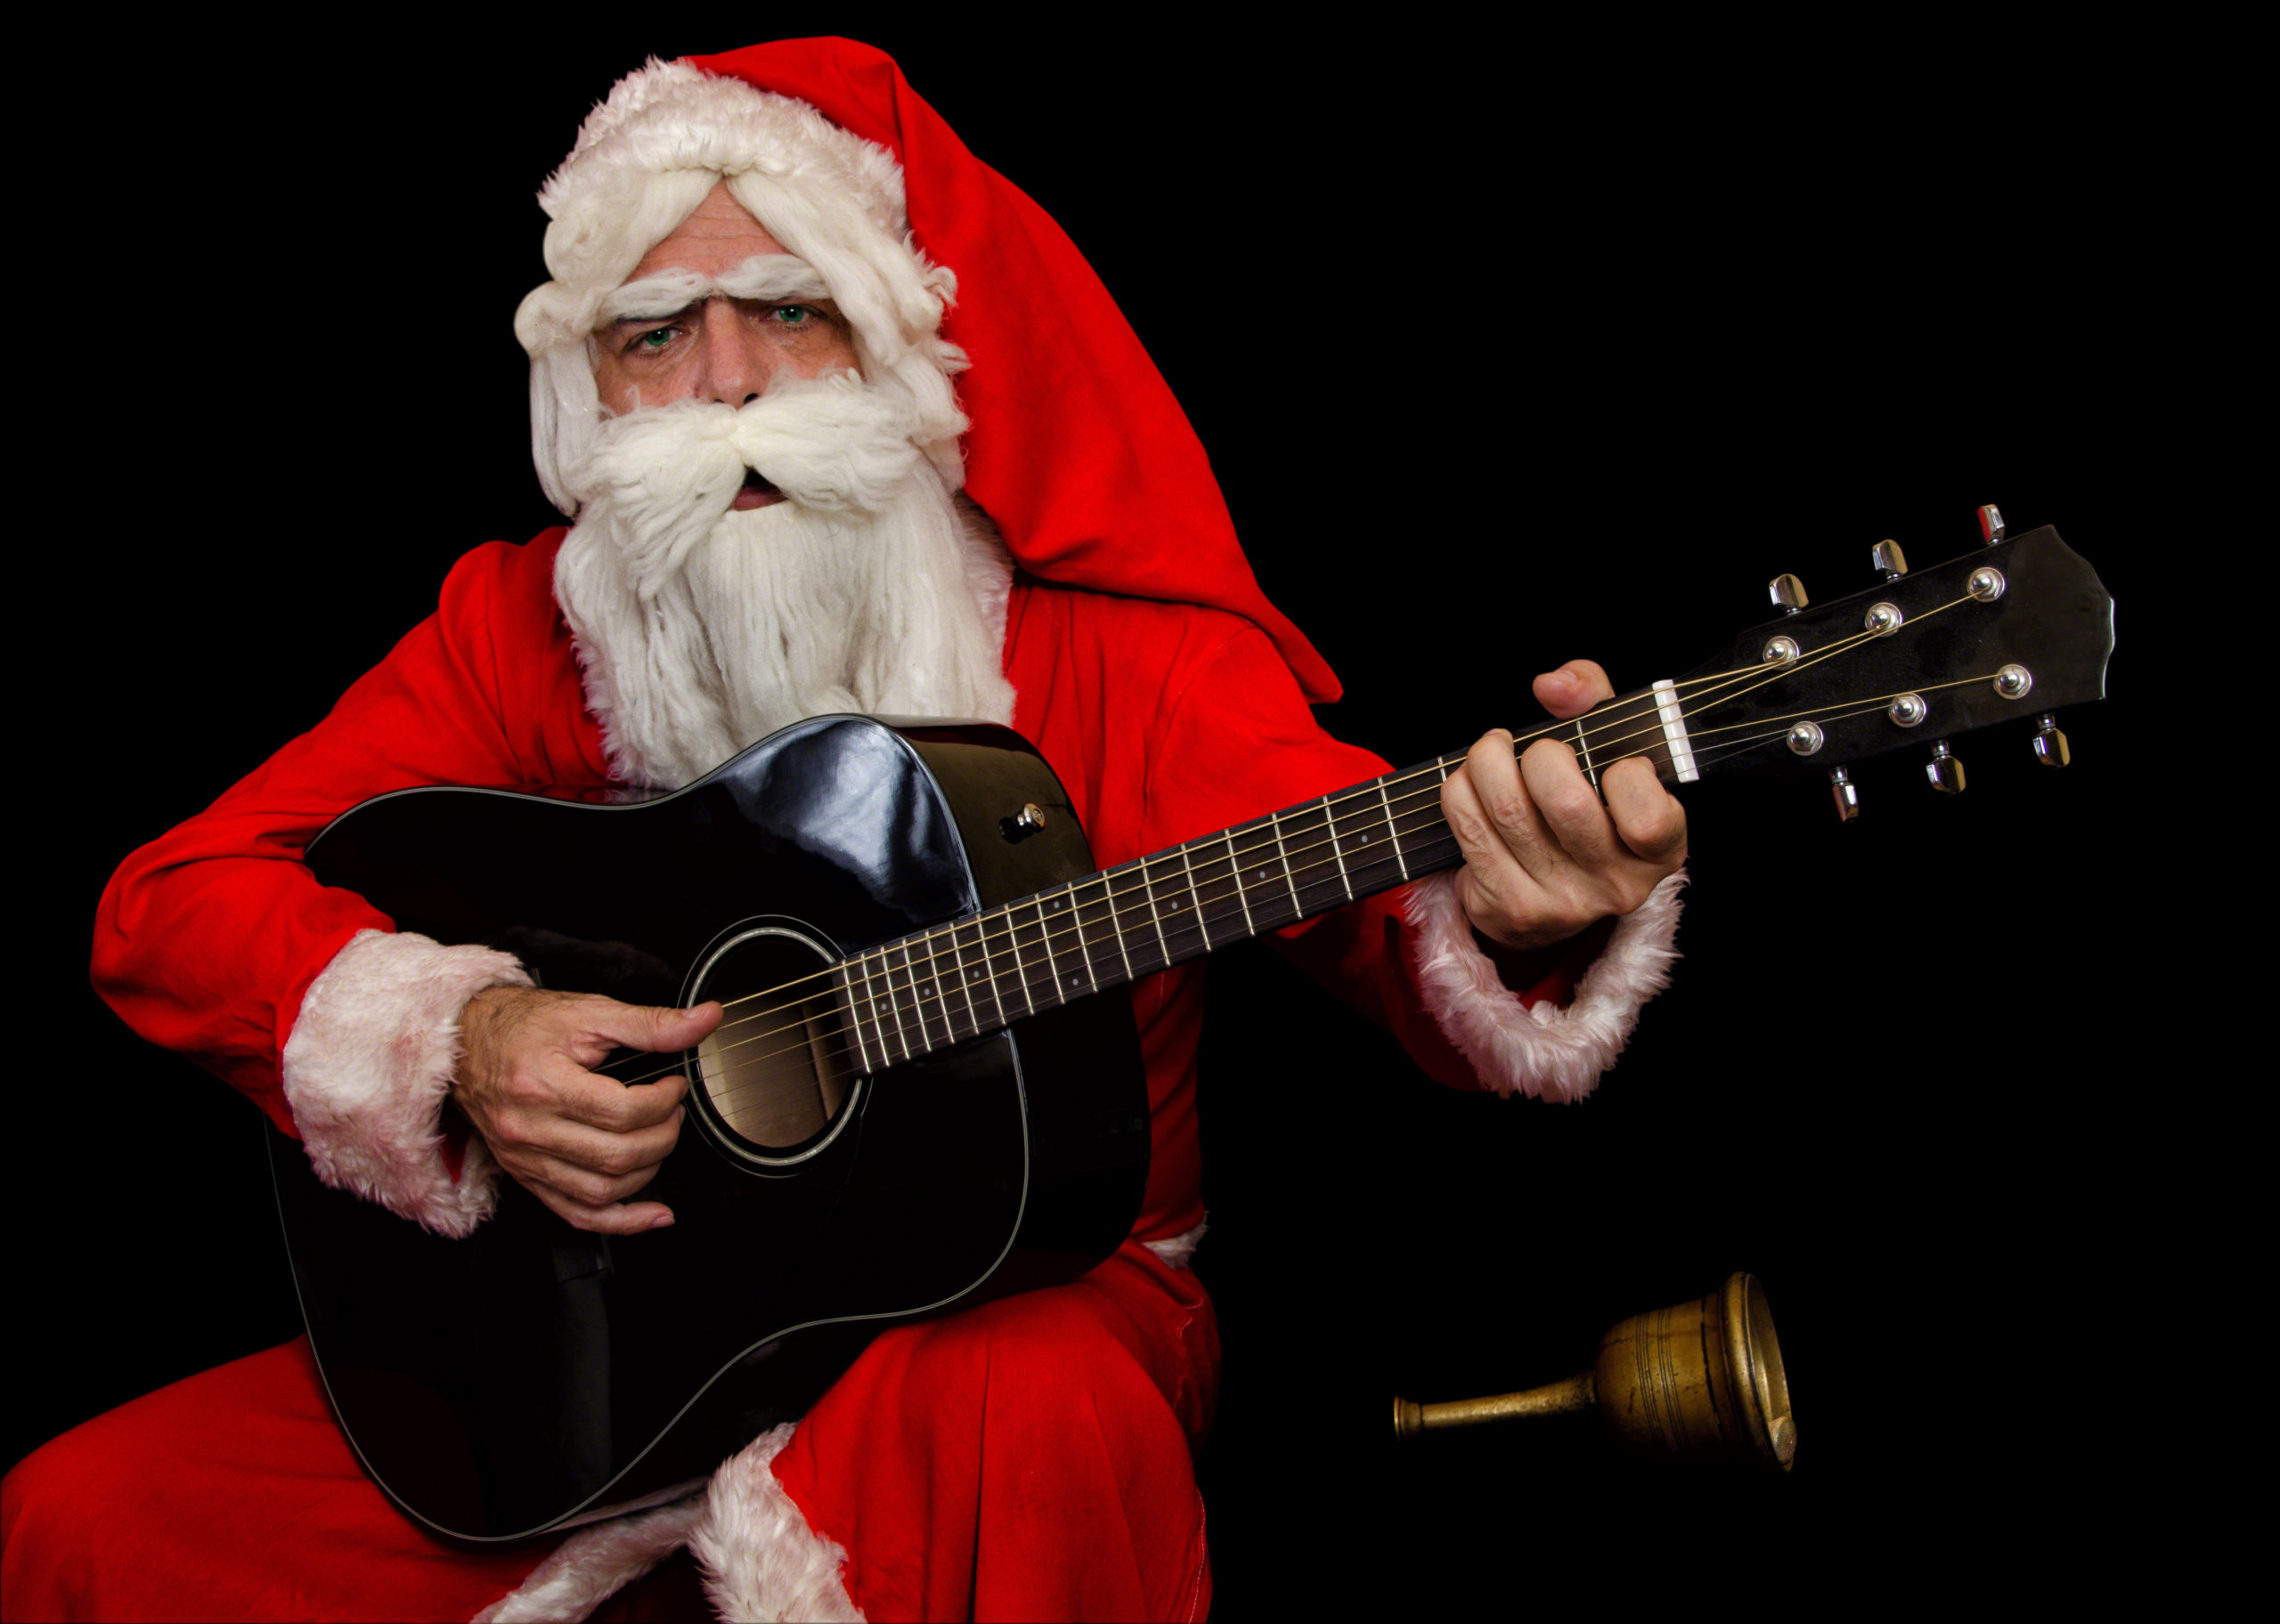 ‘Tis the Season of Cover Songs – 24 Holiday Classics That Are Free to Play, Record and Sell